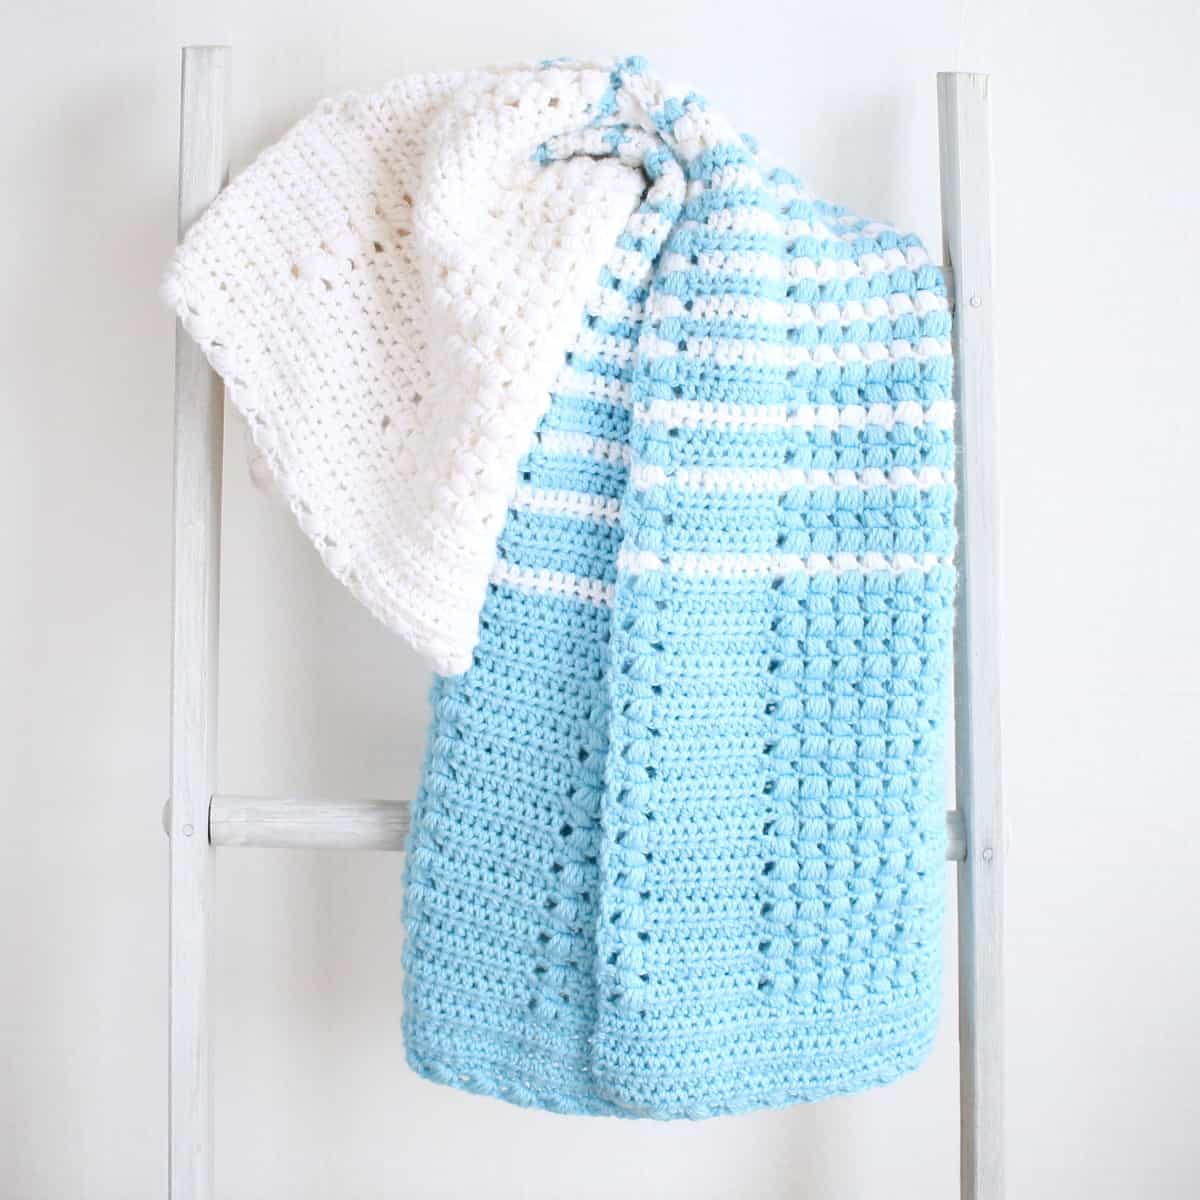 Classic Crochet Blanket with Puff Stitches. Enchanted Moments Pattern is Free.